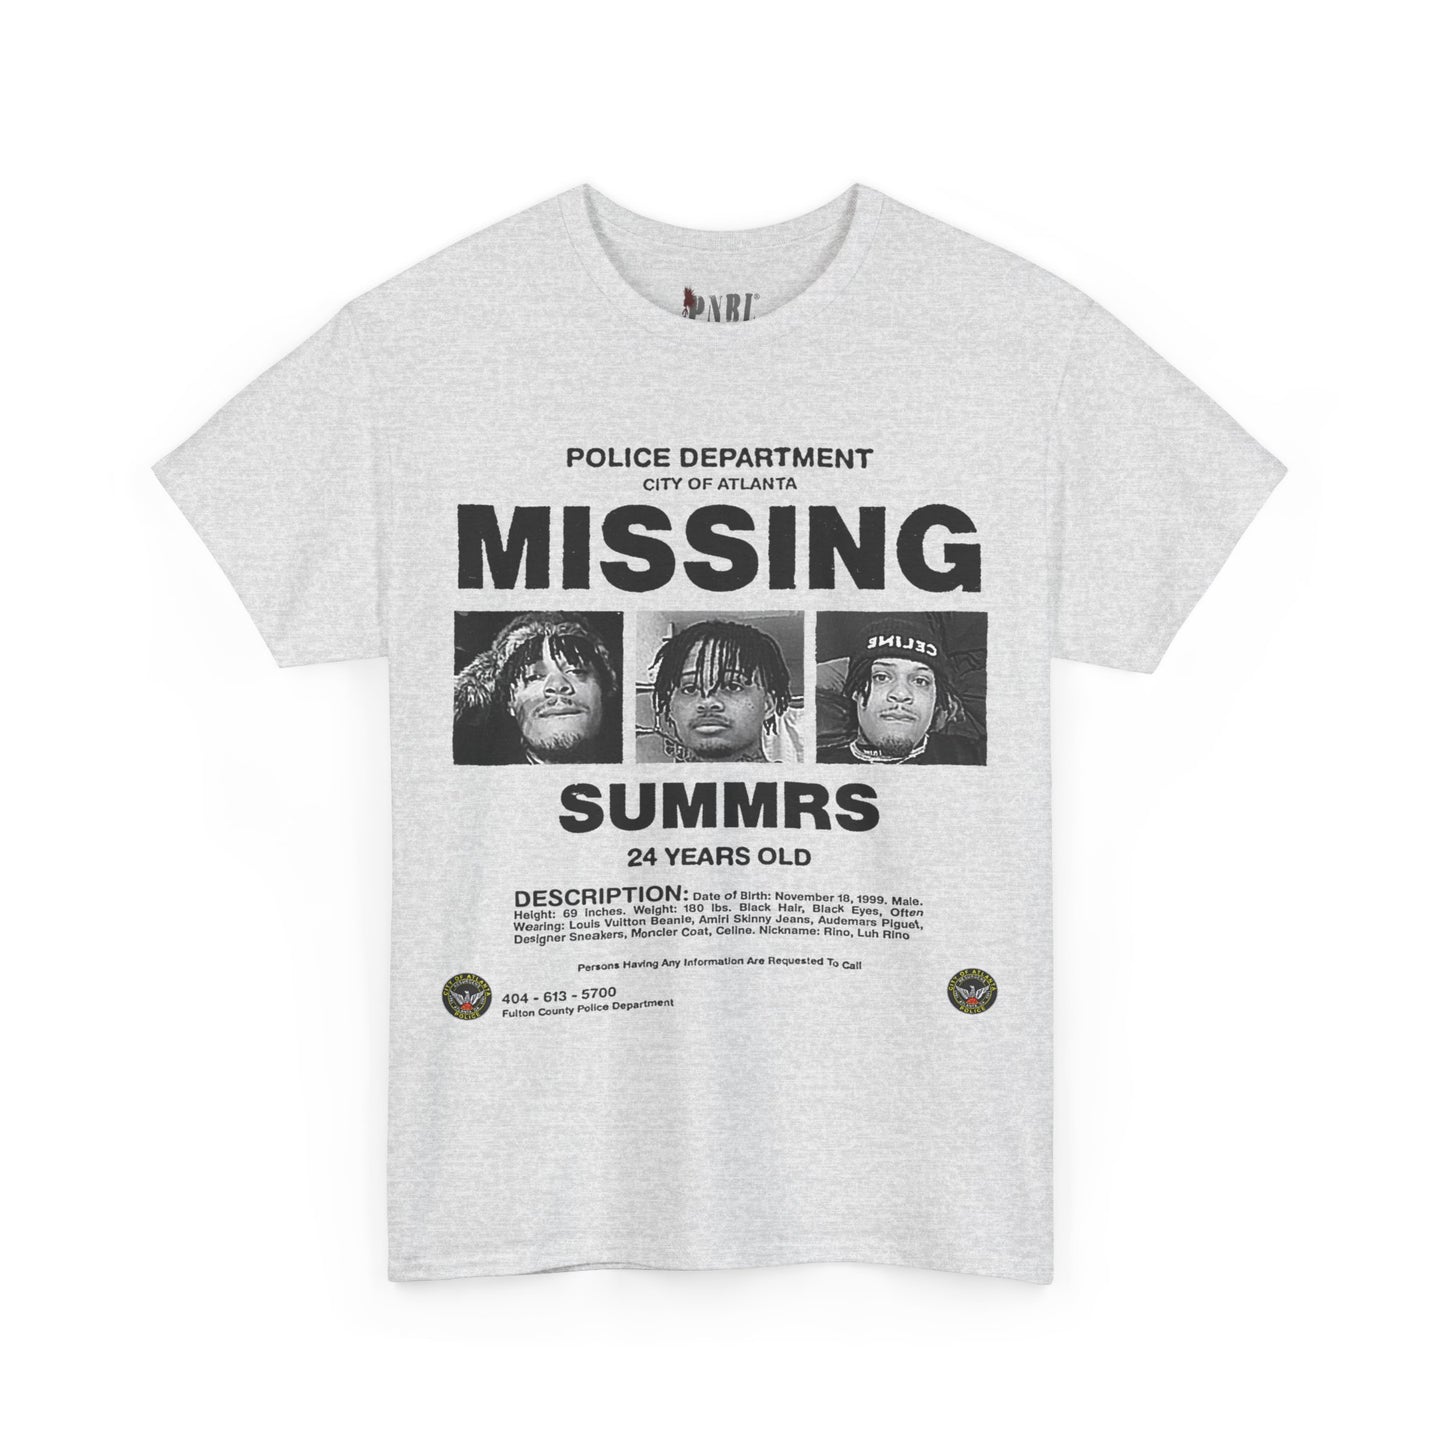 Summrs Missing Tee White